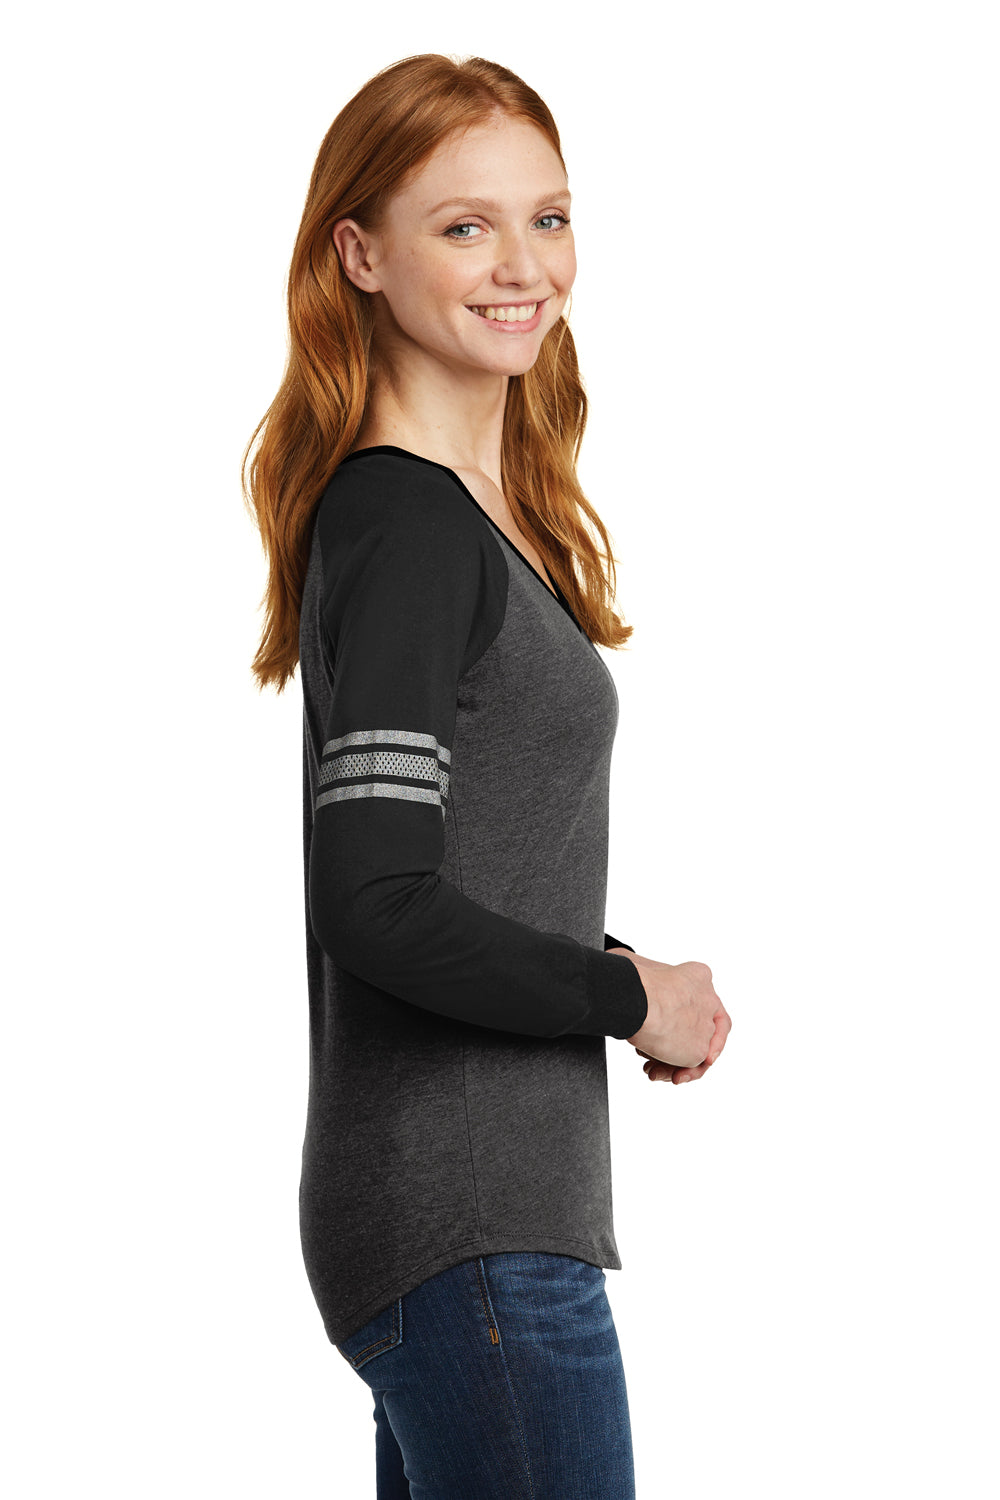 District DM477 Womens Game Long Sleeve V-Neck T-Shirt Heather Charcoal Grey/Black/Silver Grey Side